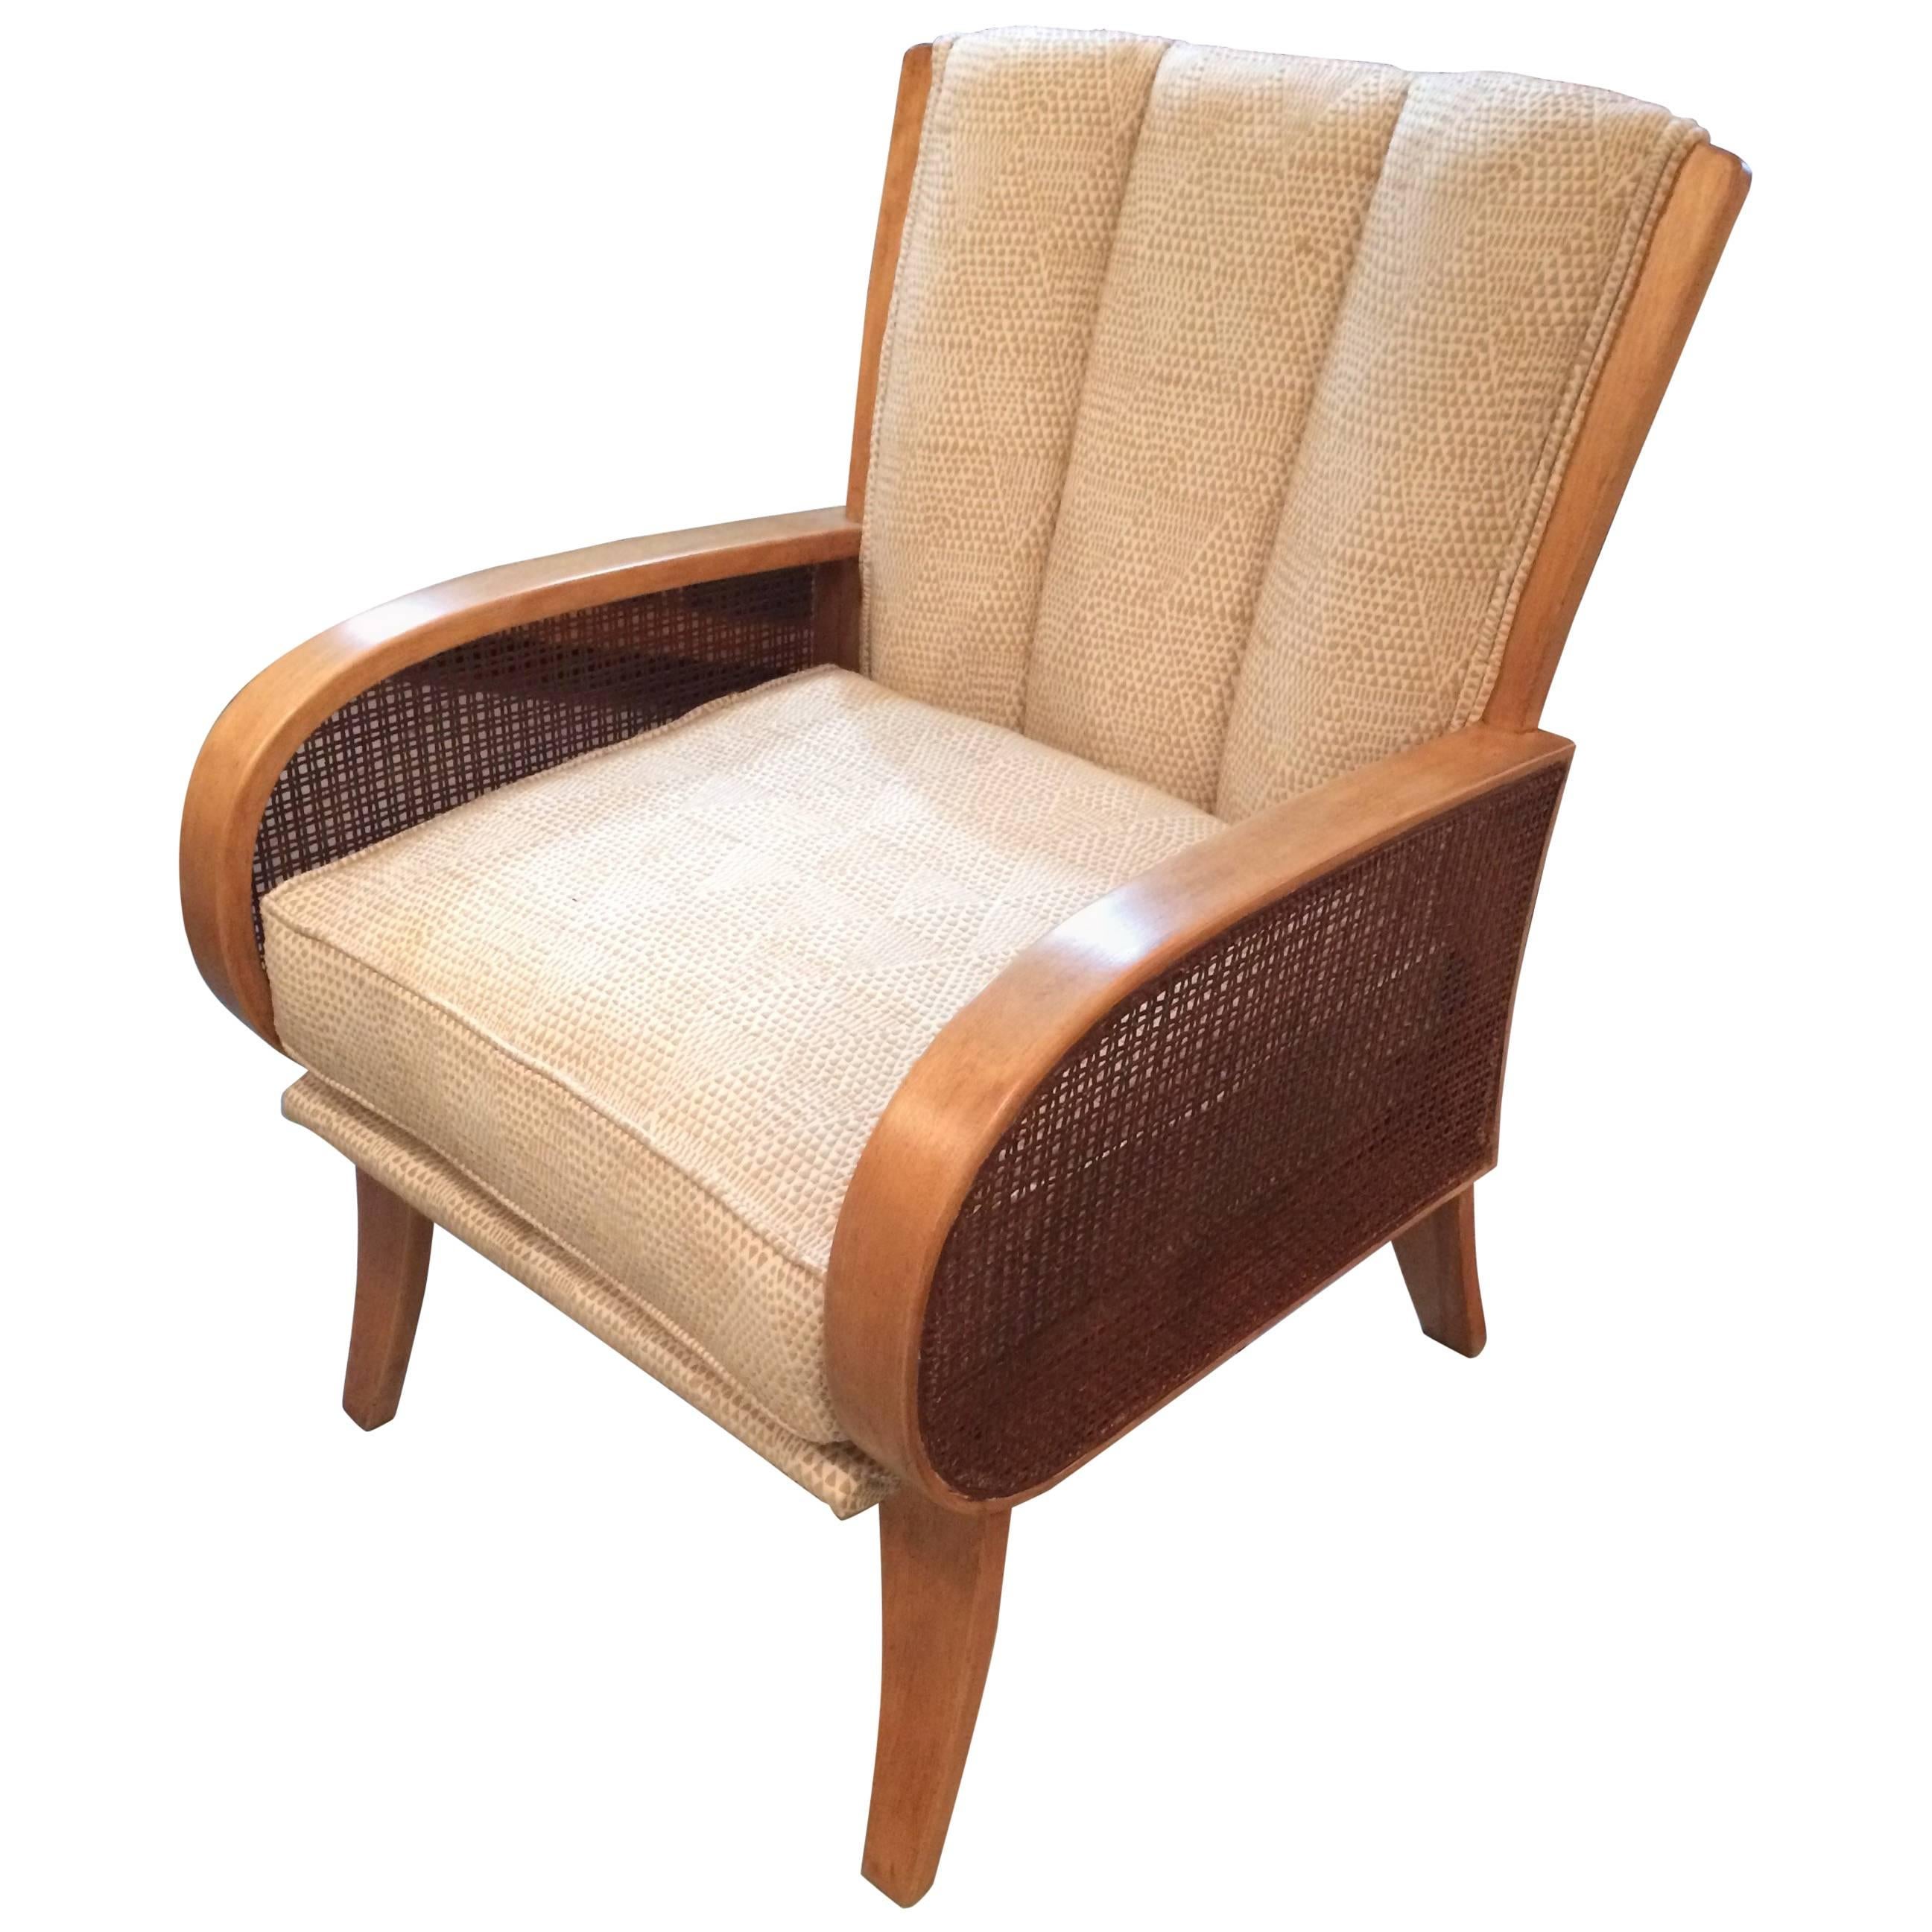 Wonderful Heywood Wakefield Ash, Cane and Upholstered Retro Chair